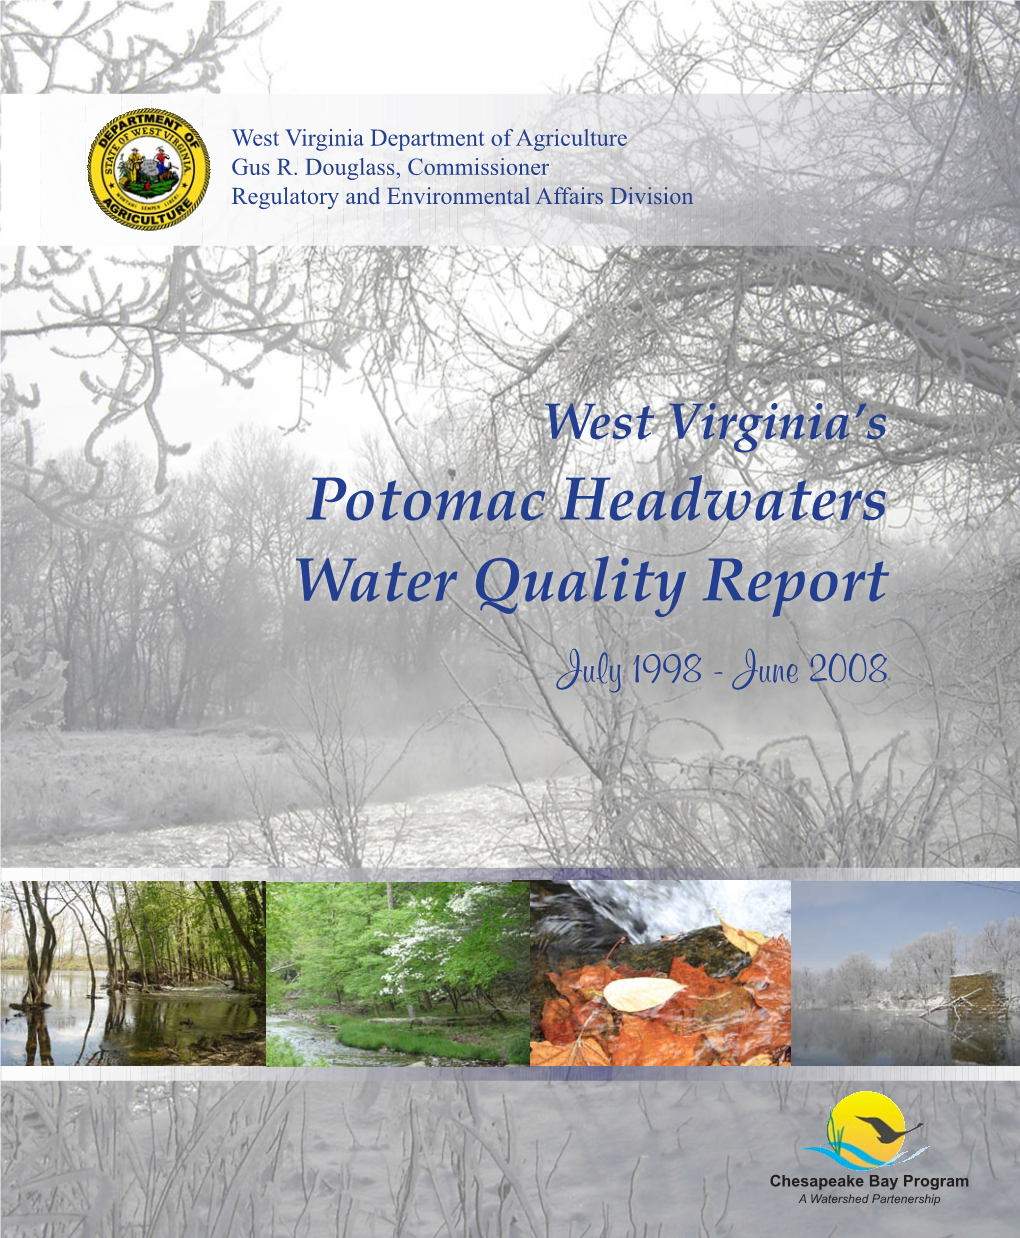 Potomac Headwaters Water Quality Report July 1998 - June 2008